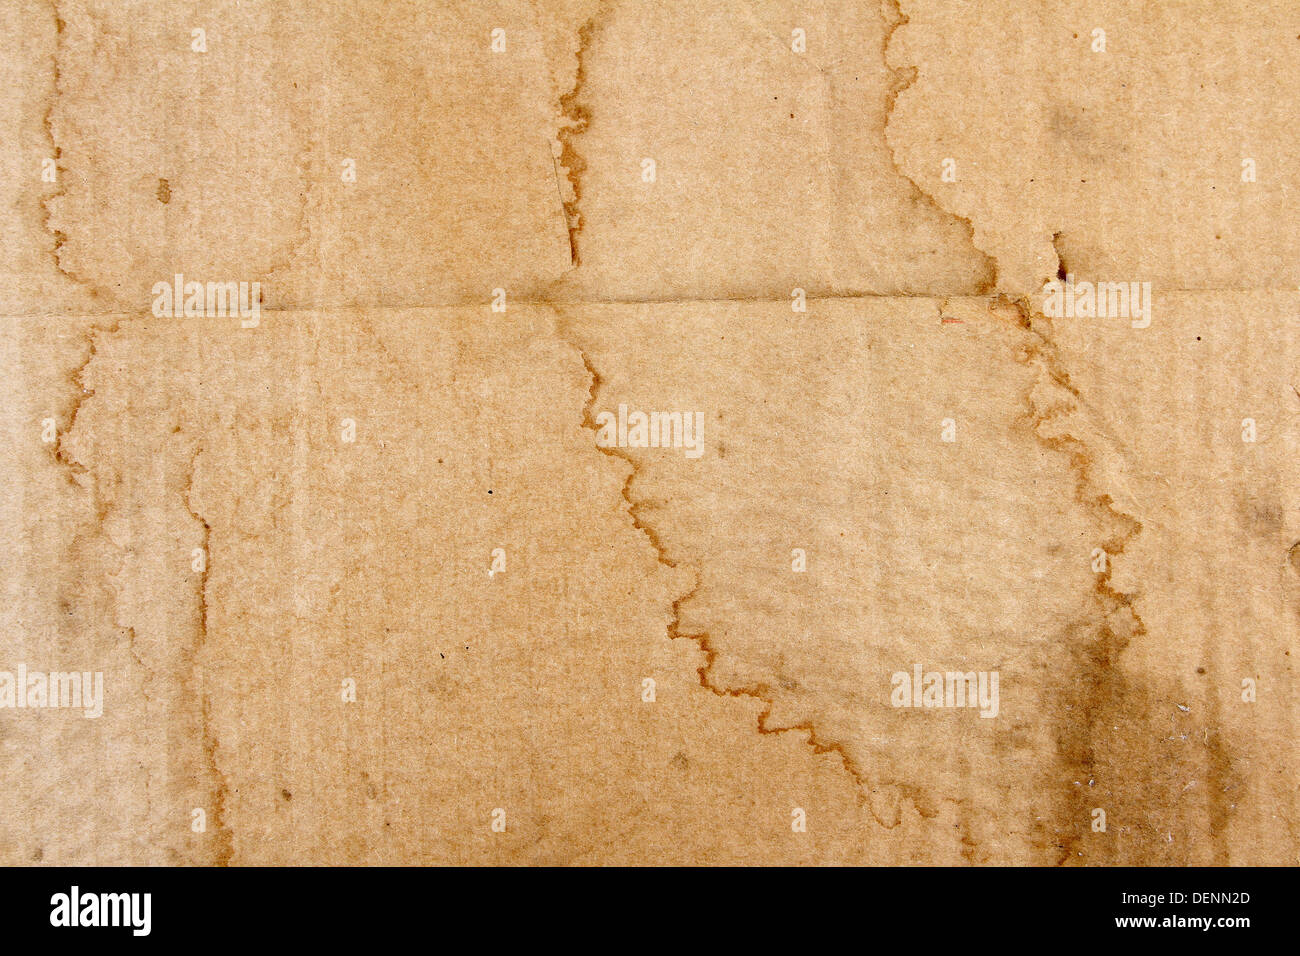 Grungy brown stained paper background Stock Photo